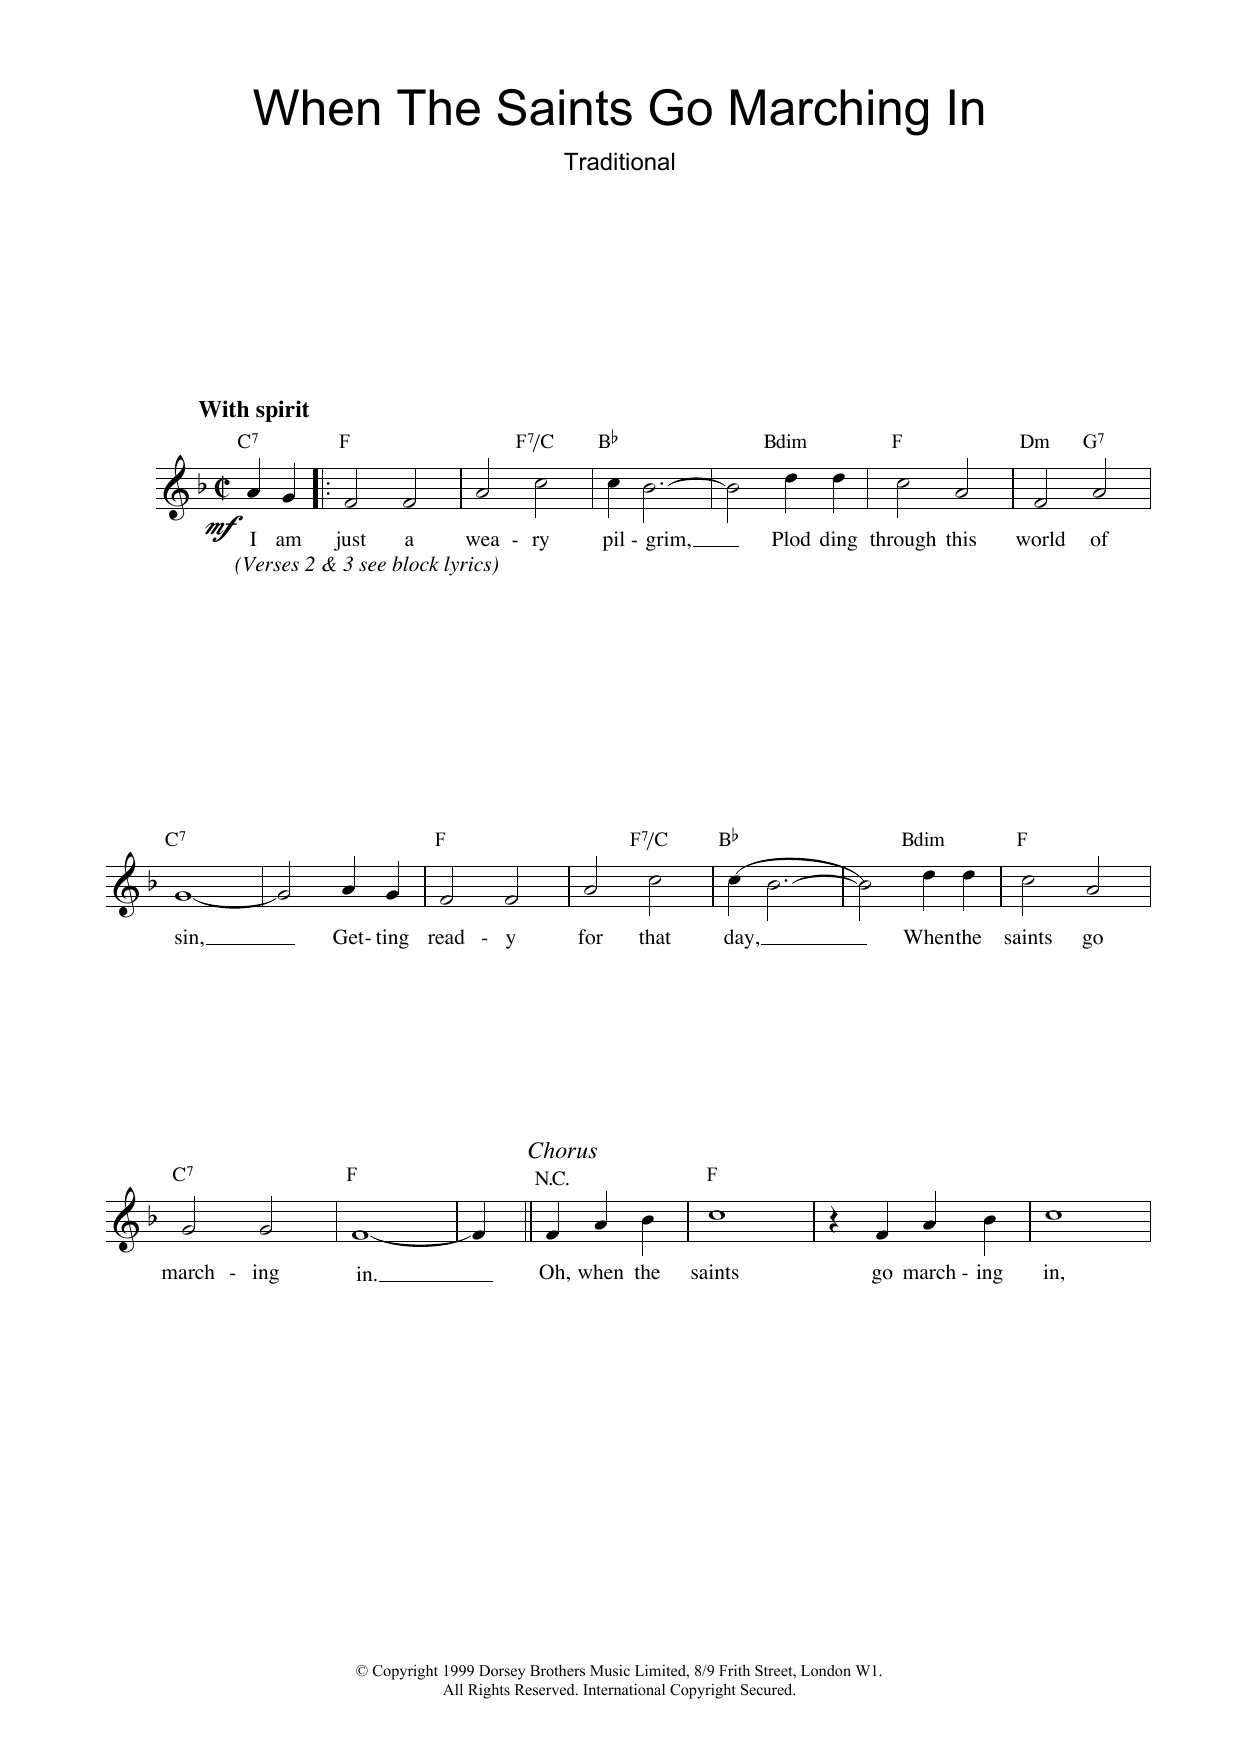 Download African-American Spiritual When The Saints Go Marching In sheet music and printable PDF score & Folk music notes